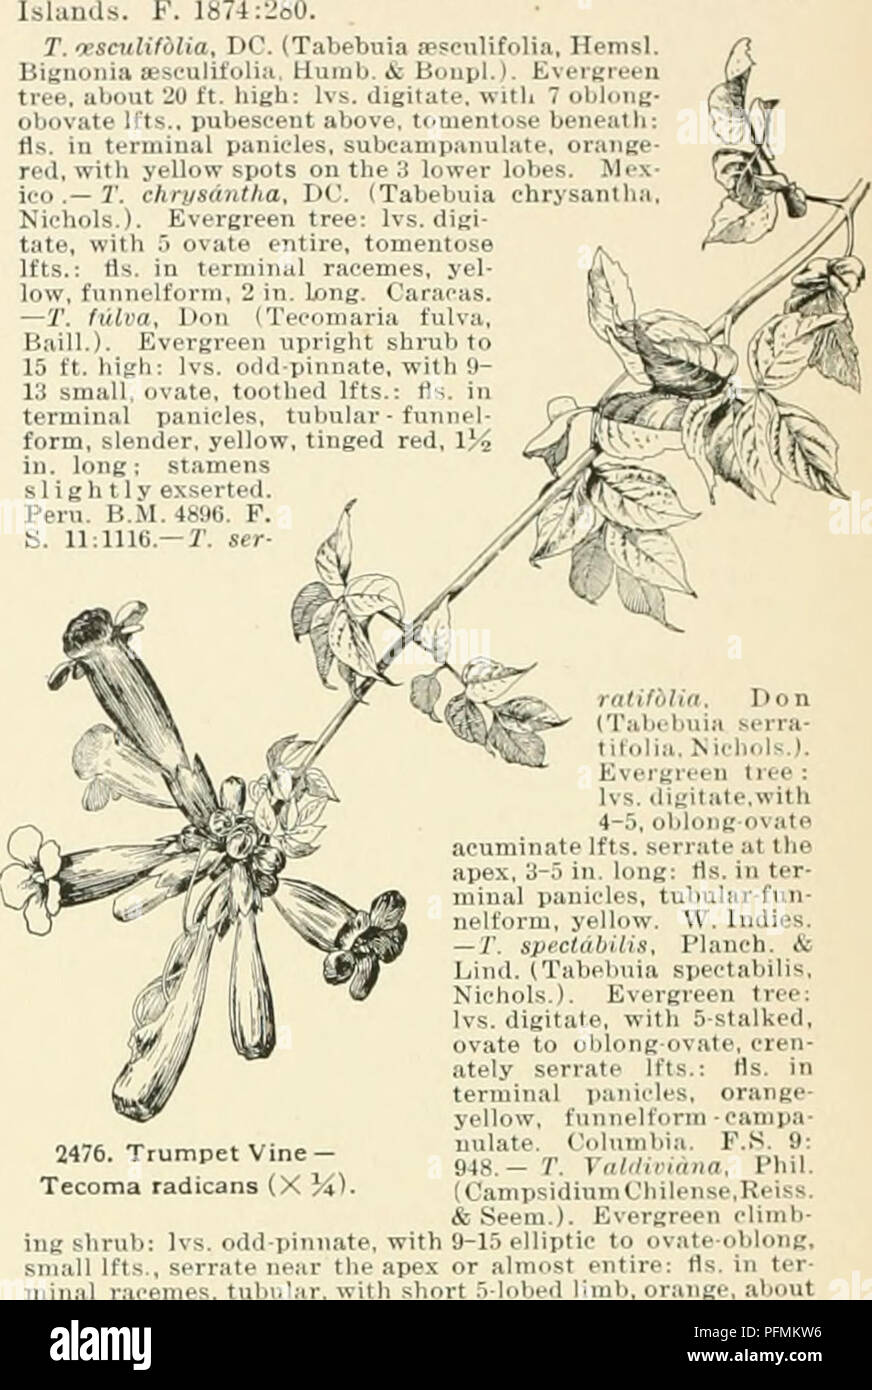 Cyclopedia Of American Horticulture Comprising Suggestions For Cultivation Of Horticultural Plants Descriptions Of The Species Of Fruits Vegetables Flowers And Ornamental Plants Sold In The United States And Canada Together With